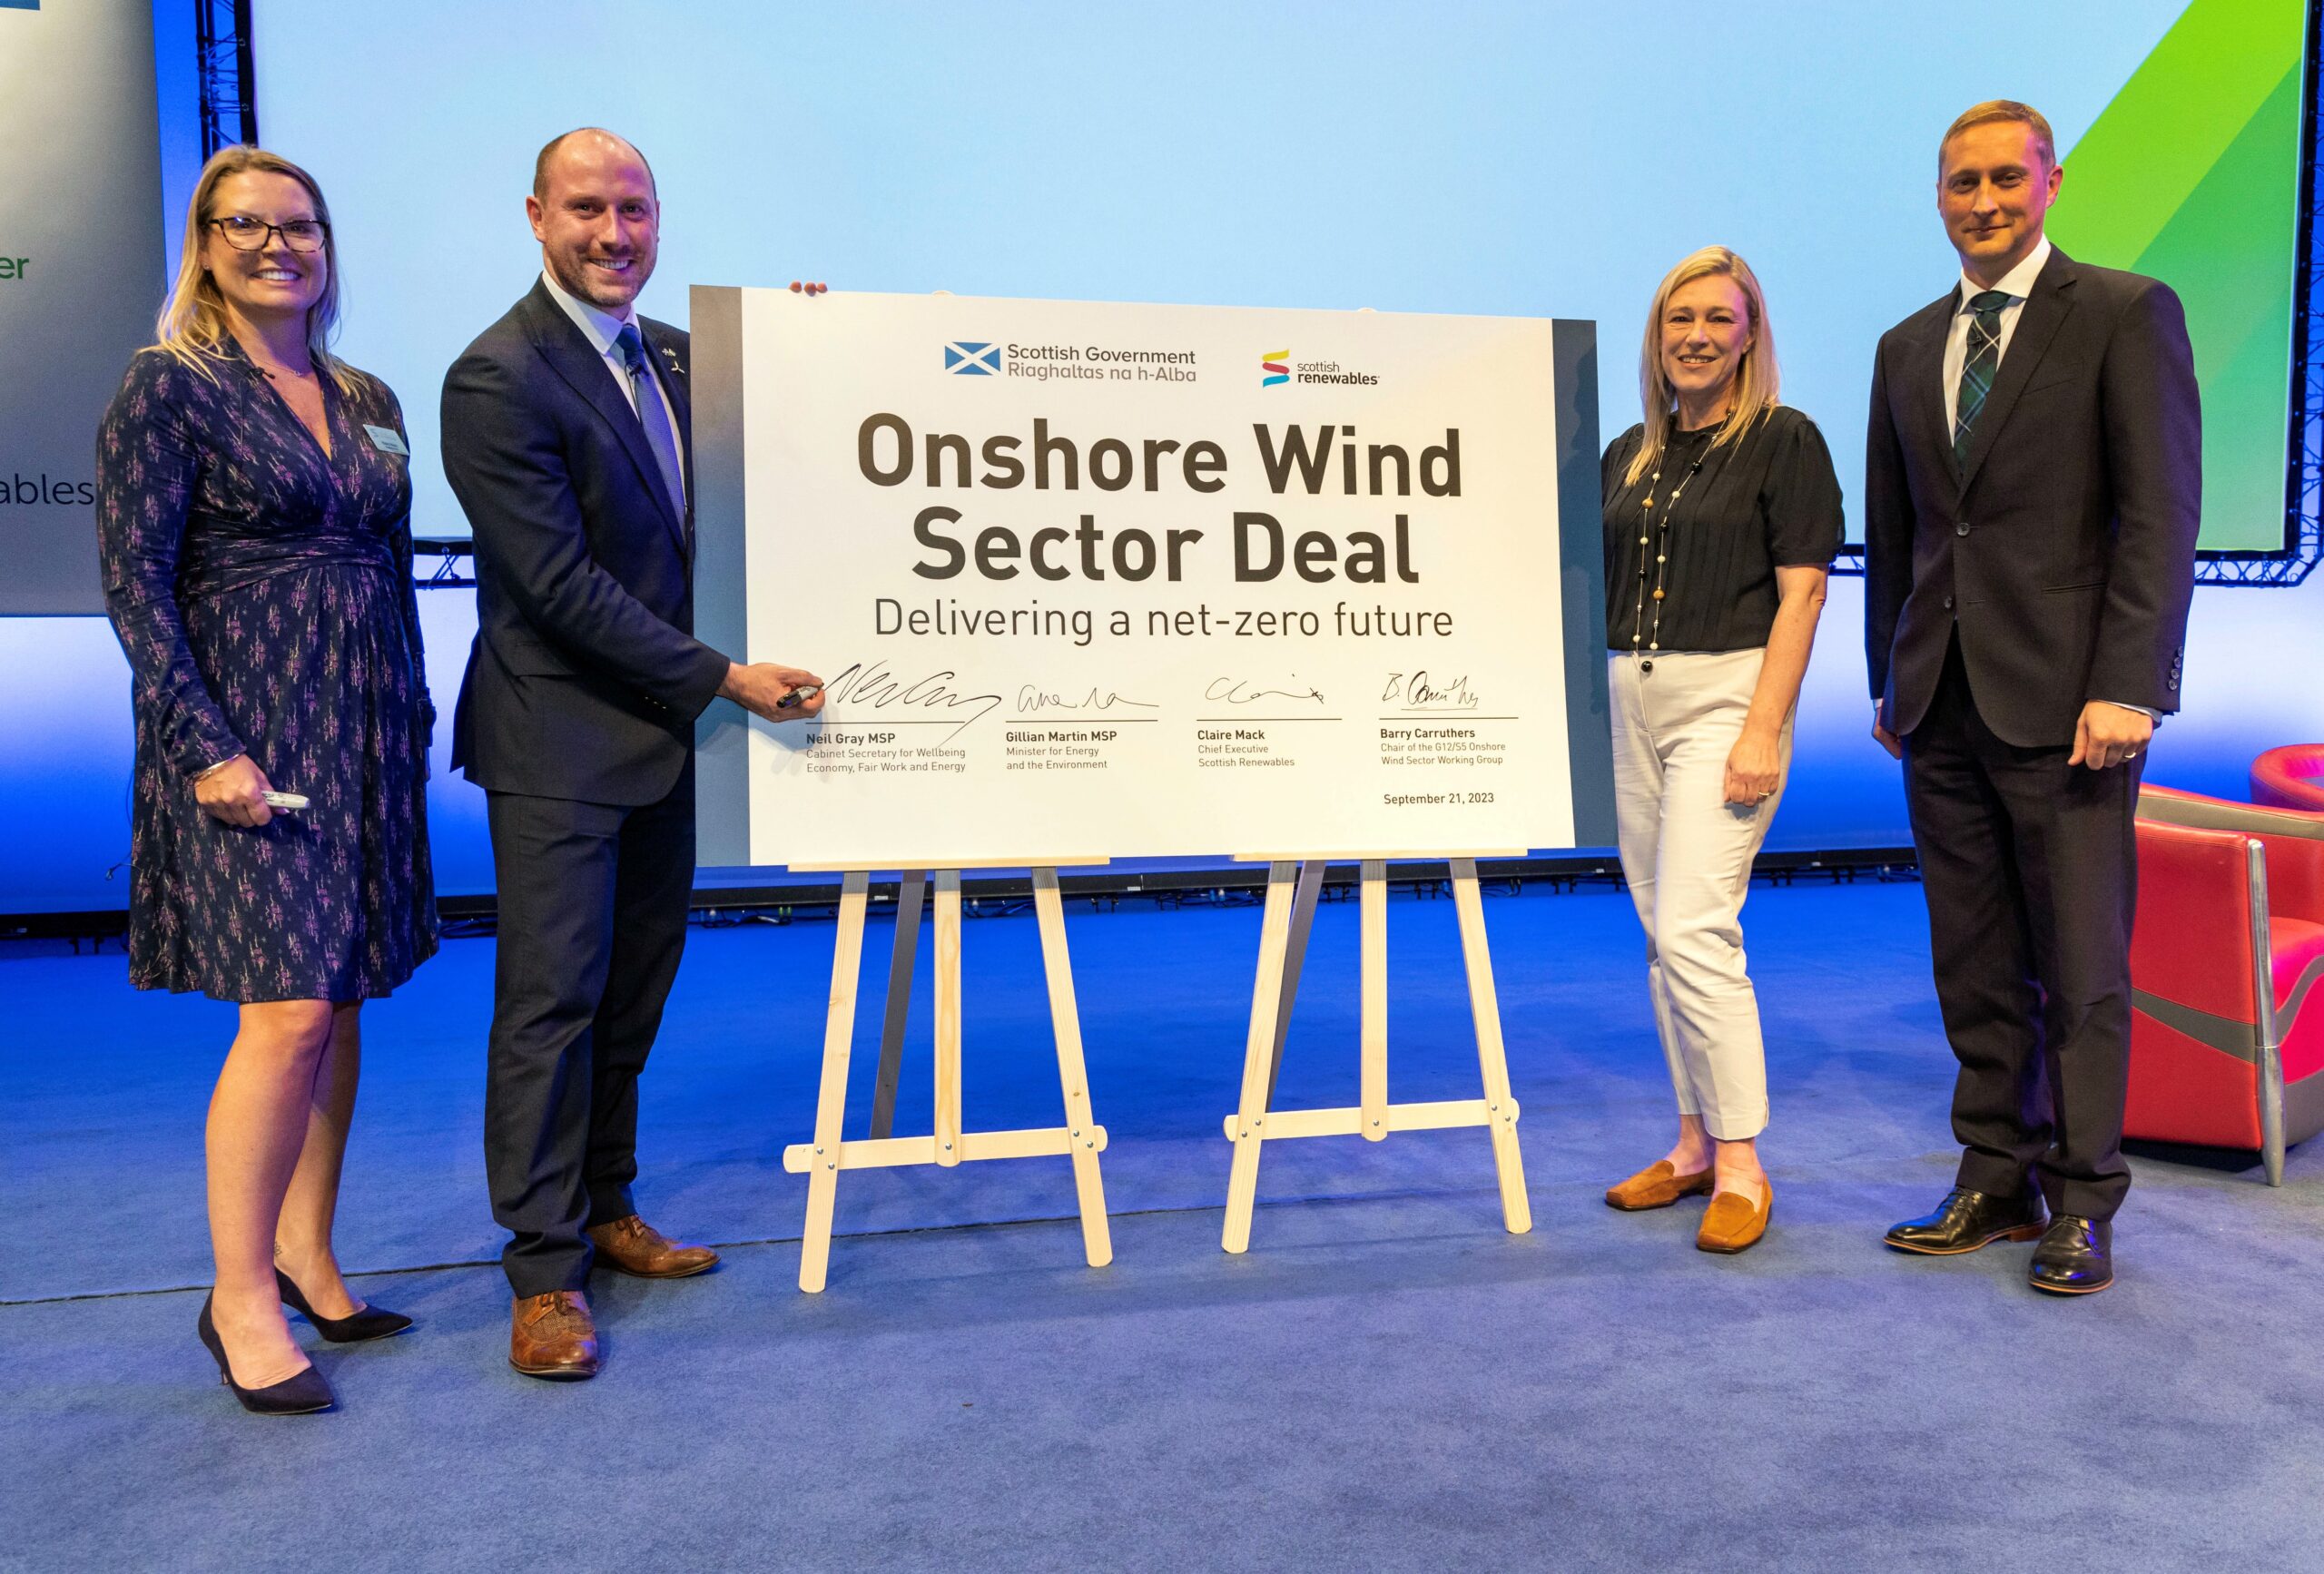 Onshore Wind Sector Deal